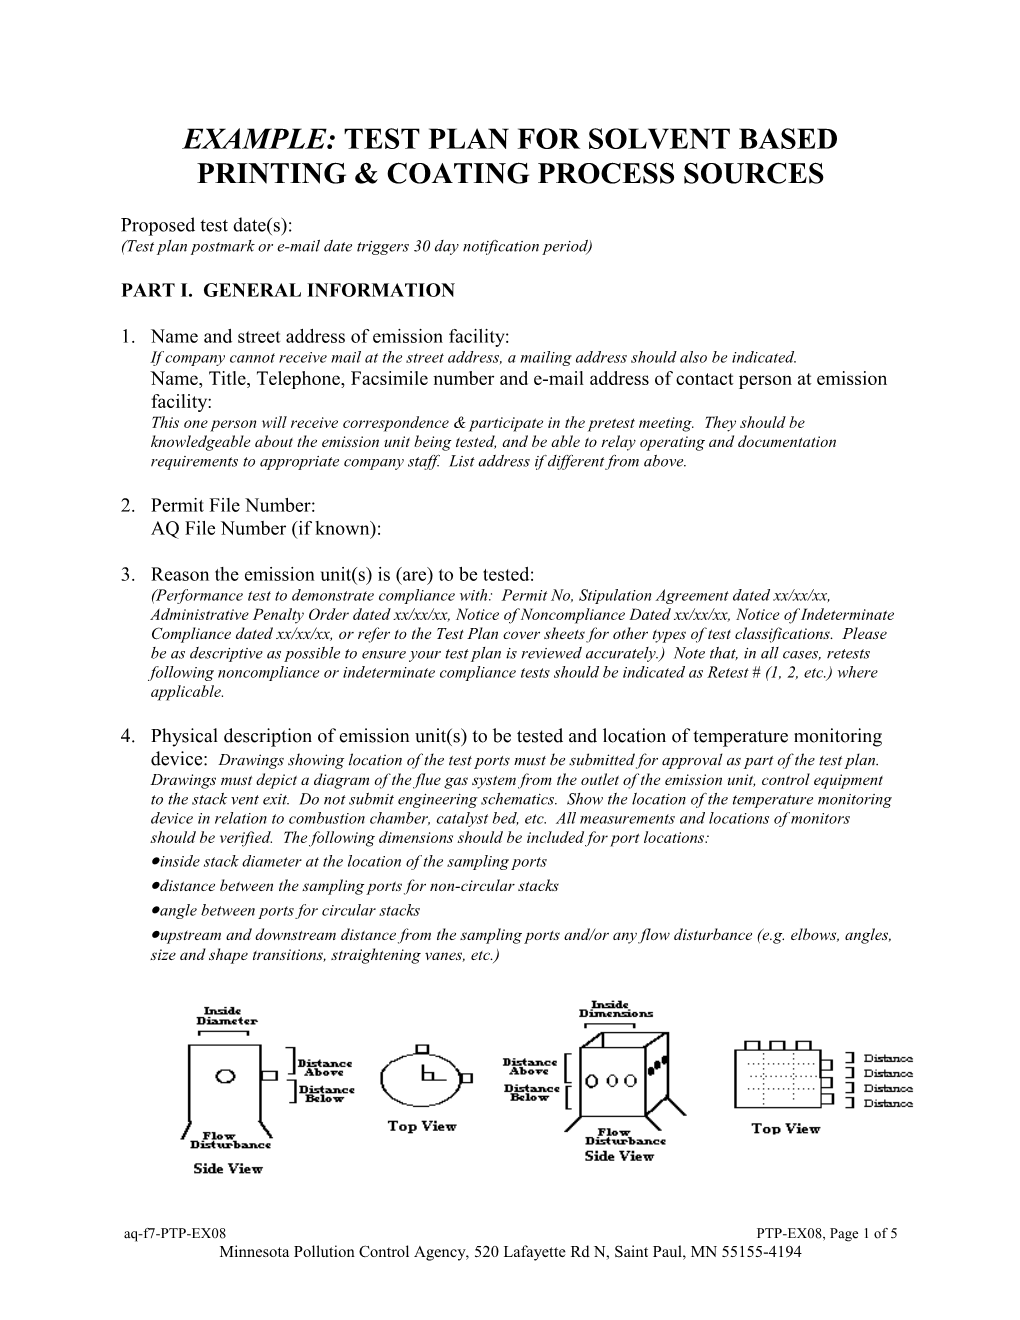 Test Plan for Solvent Based Printing & Coating Process Sources